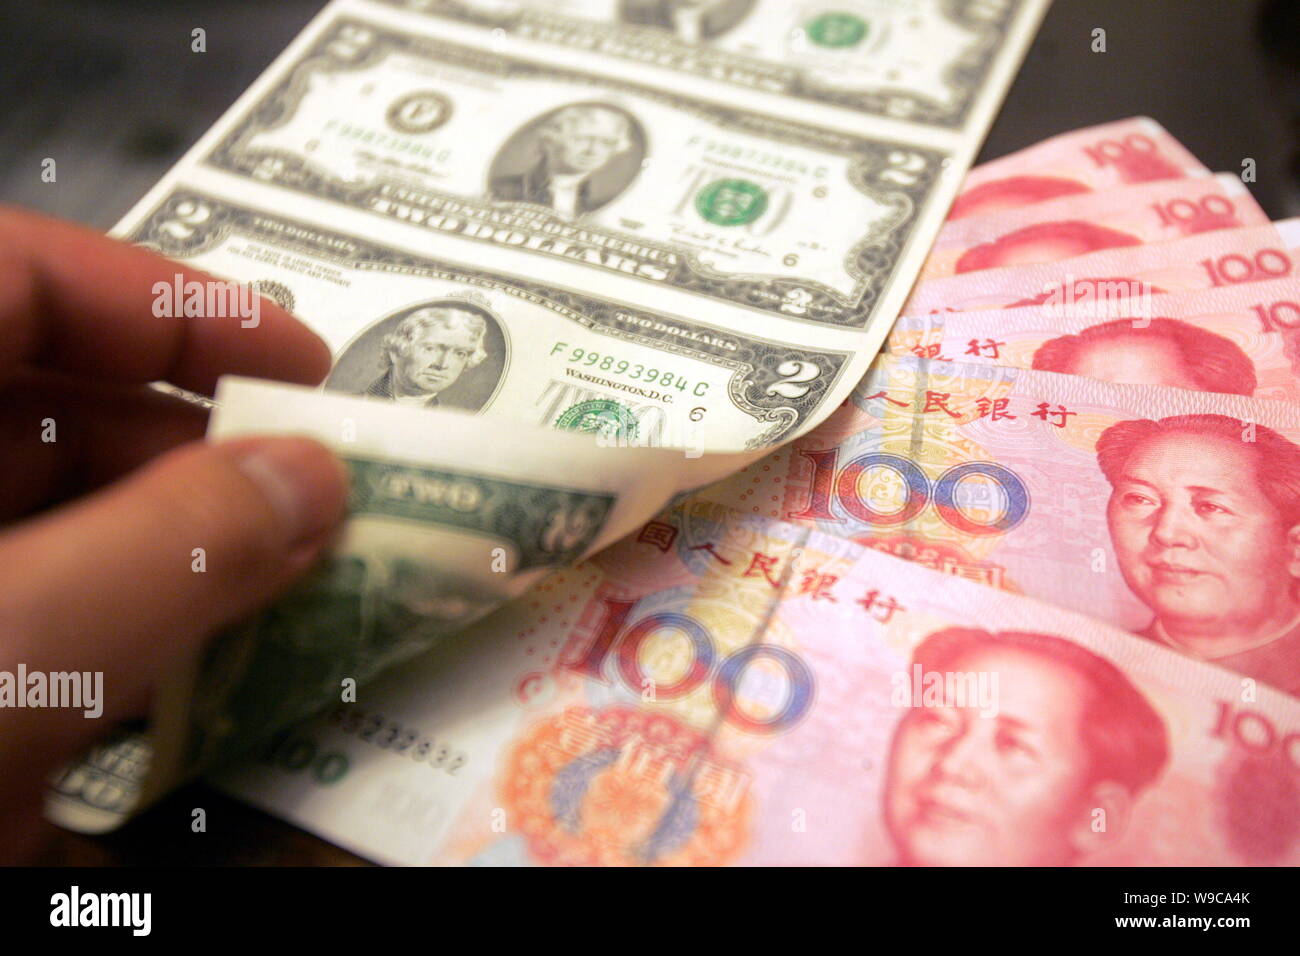 100 usd to rmb